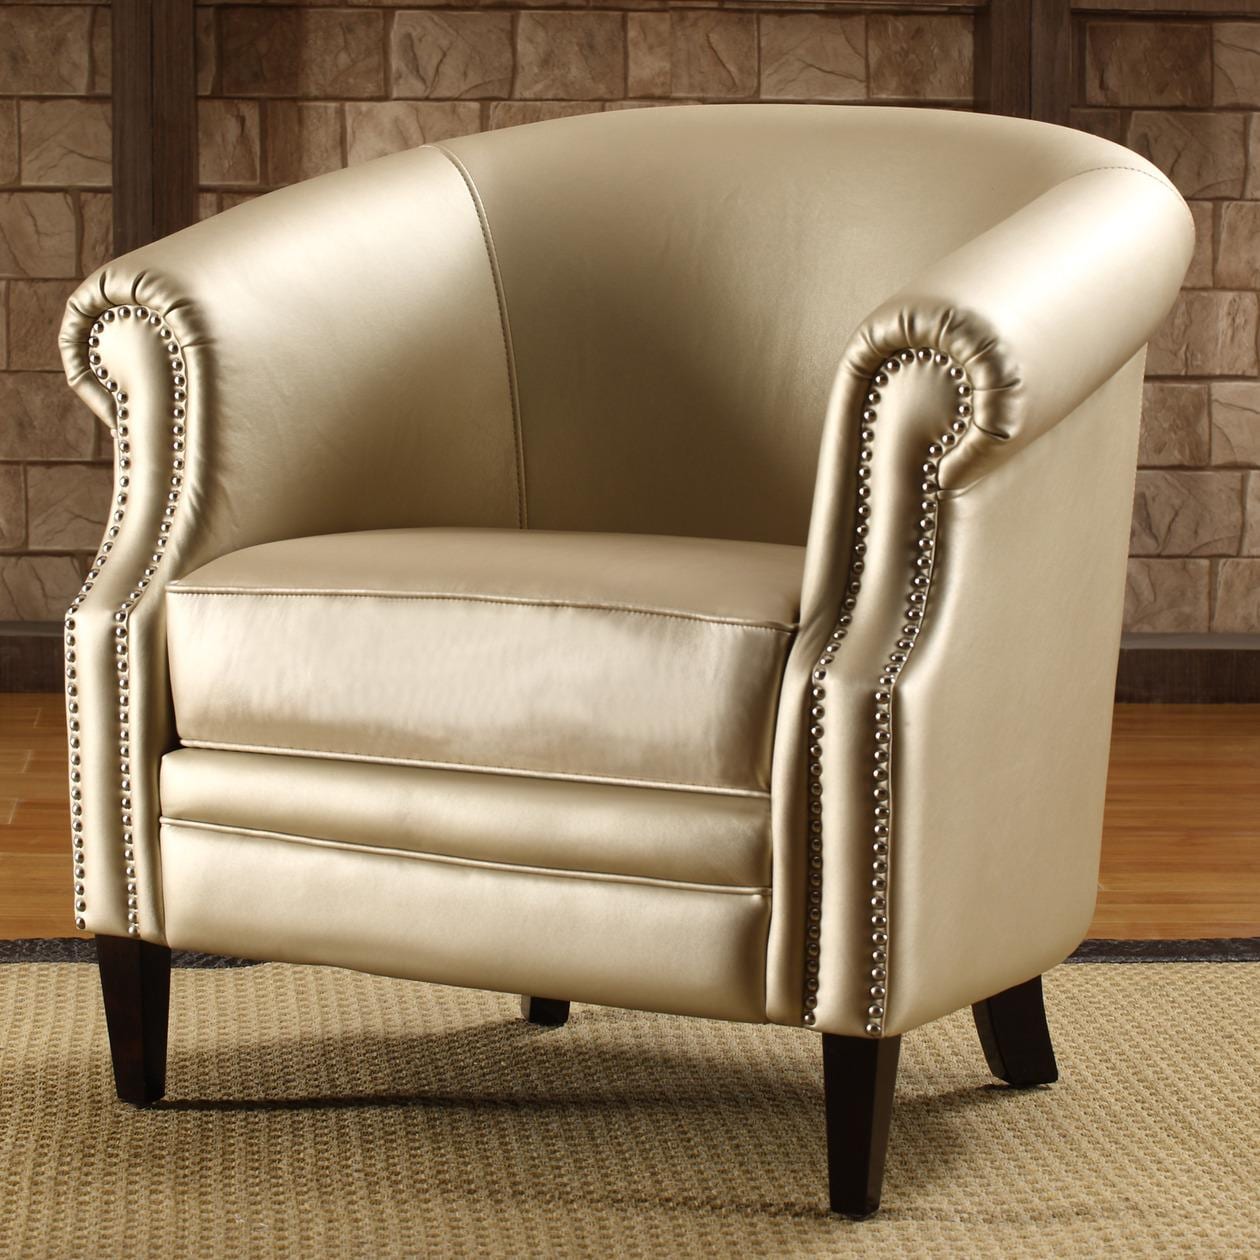 Trenton Gold Metallic Accent Arm Chair - Free Shipping Today